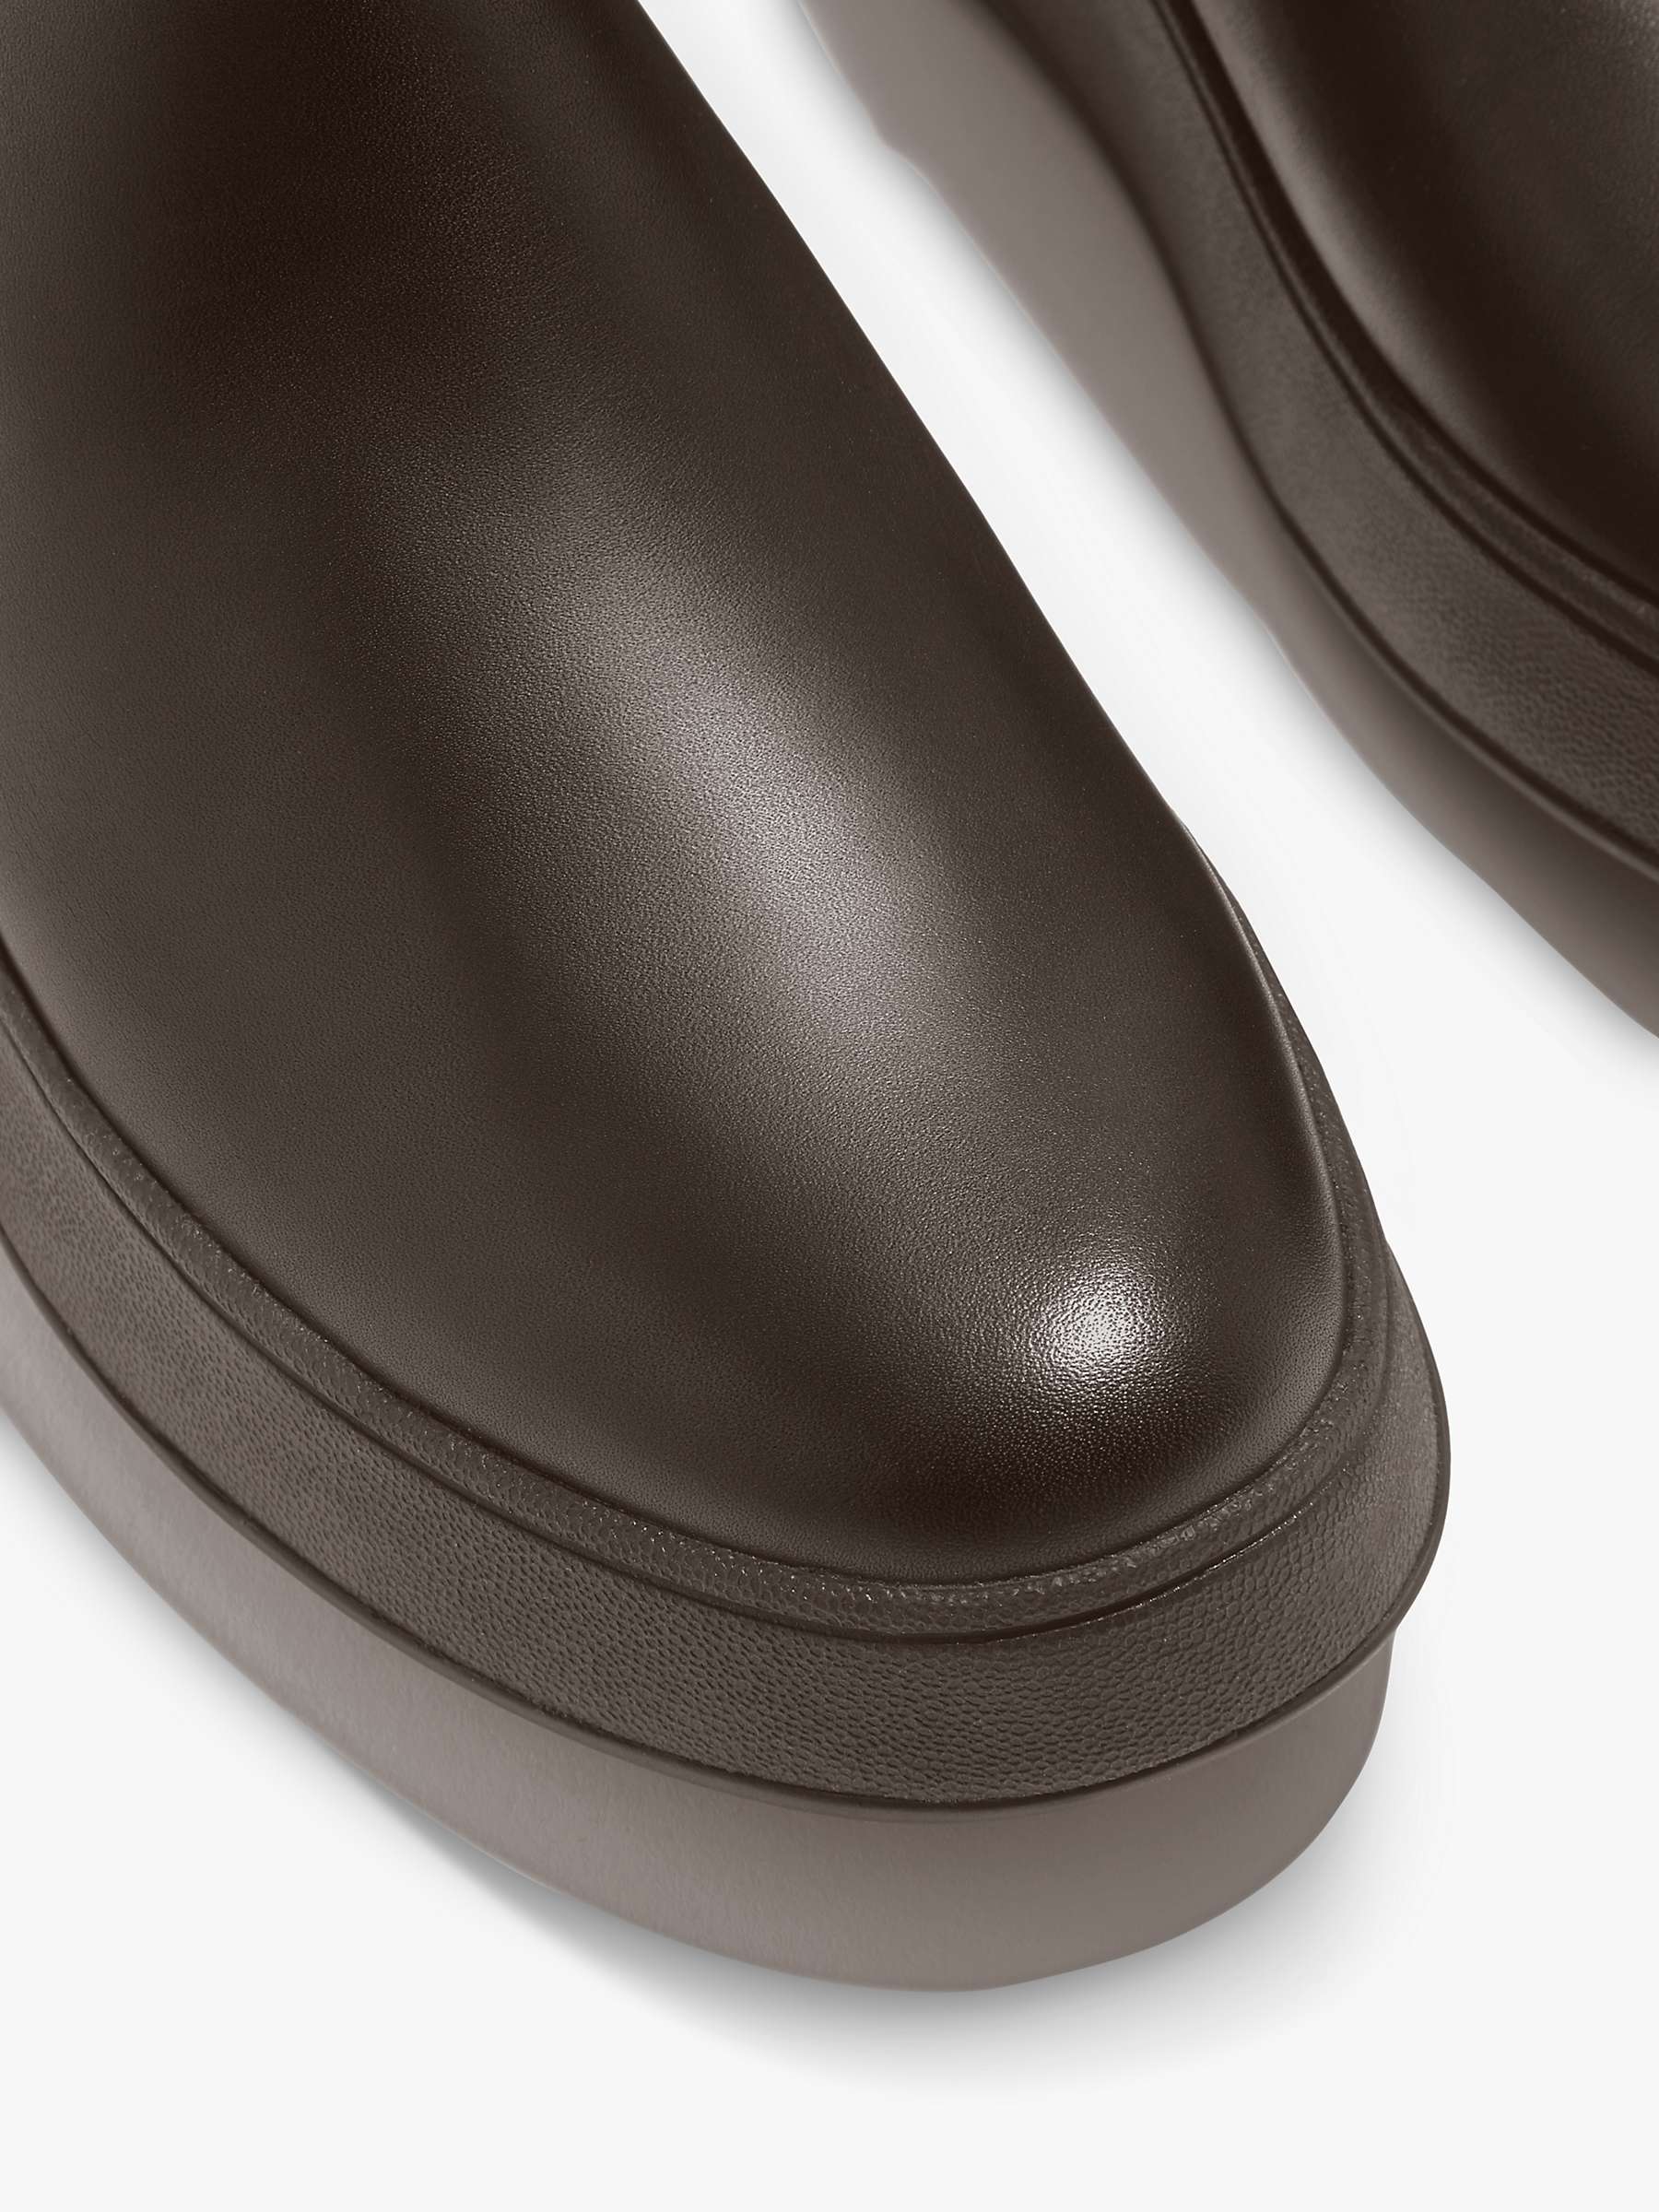 Buy FitFlop F-Mode Leather Ankle Boots Online at johnlewis.com